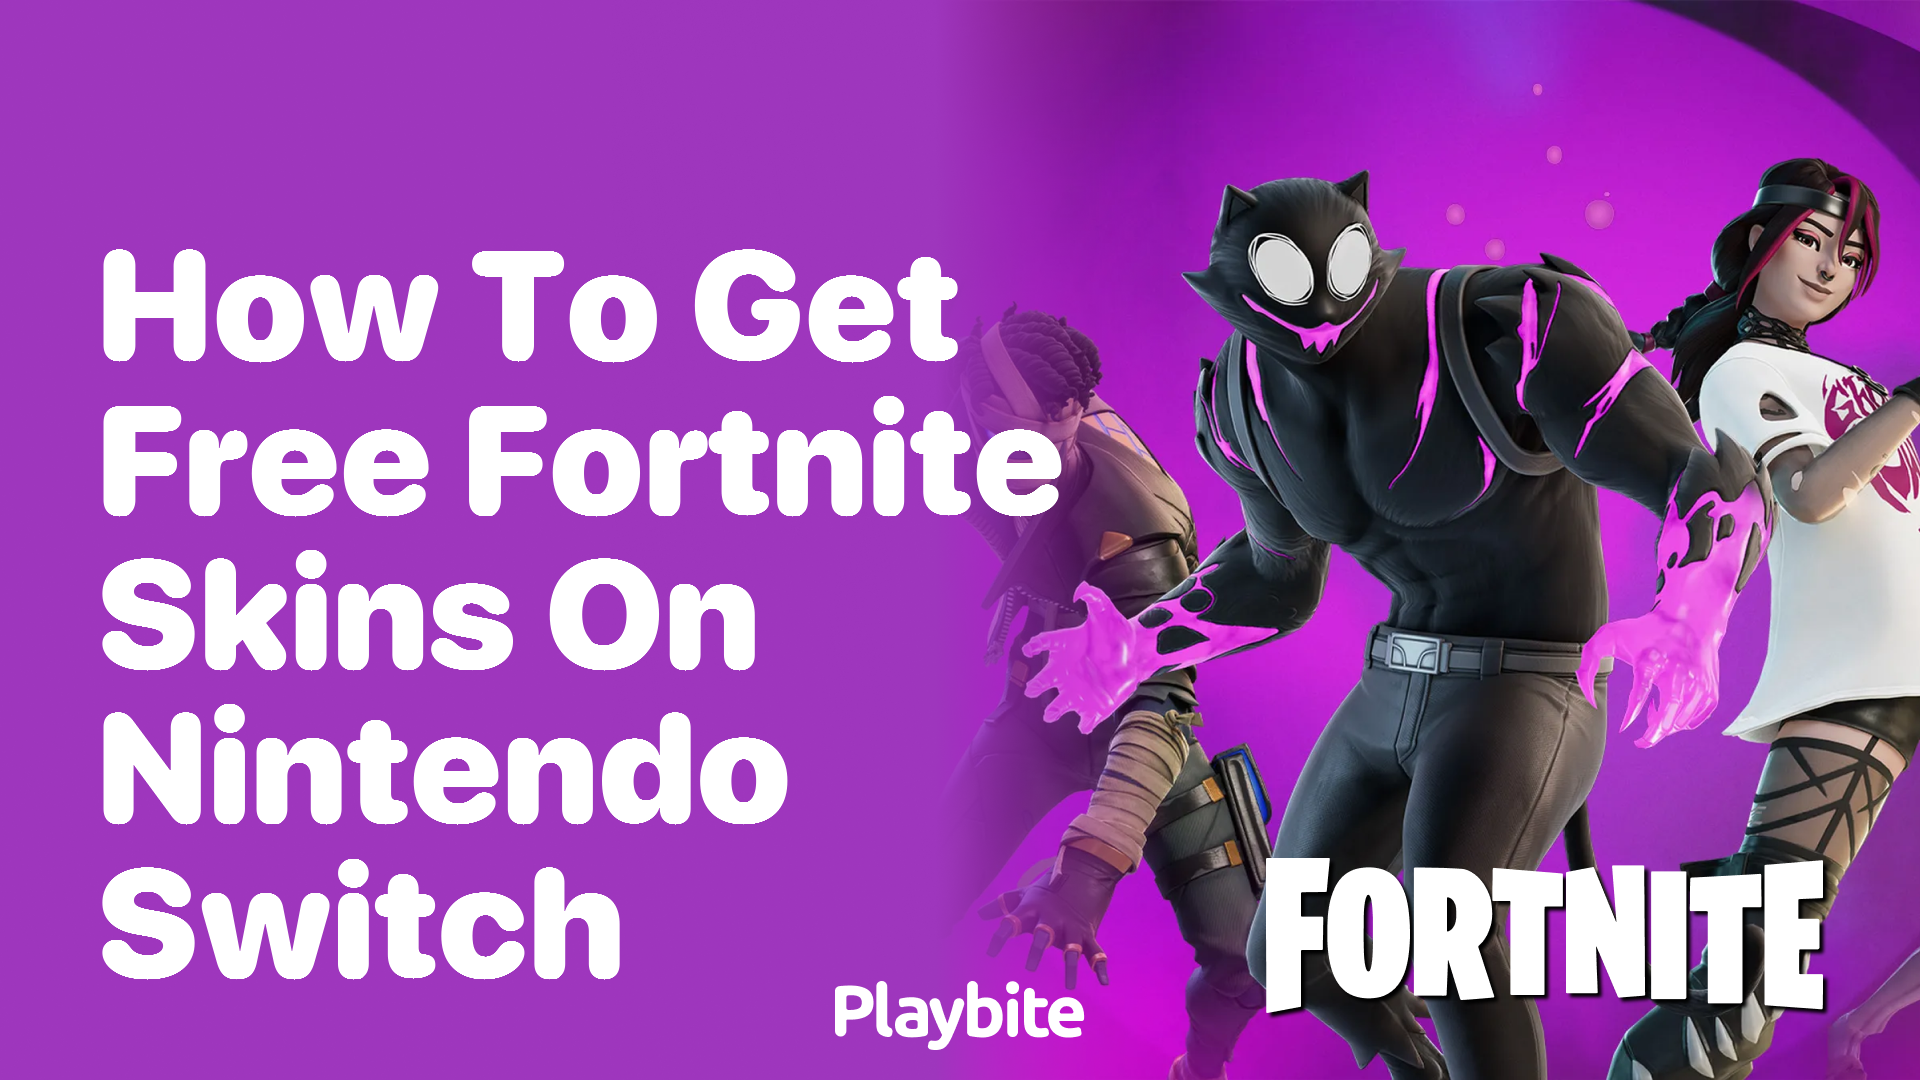 How to Get Free Fortnite Skins on Nintendo Switch